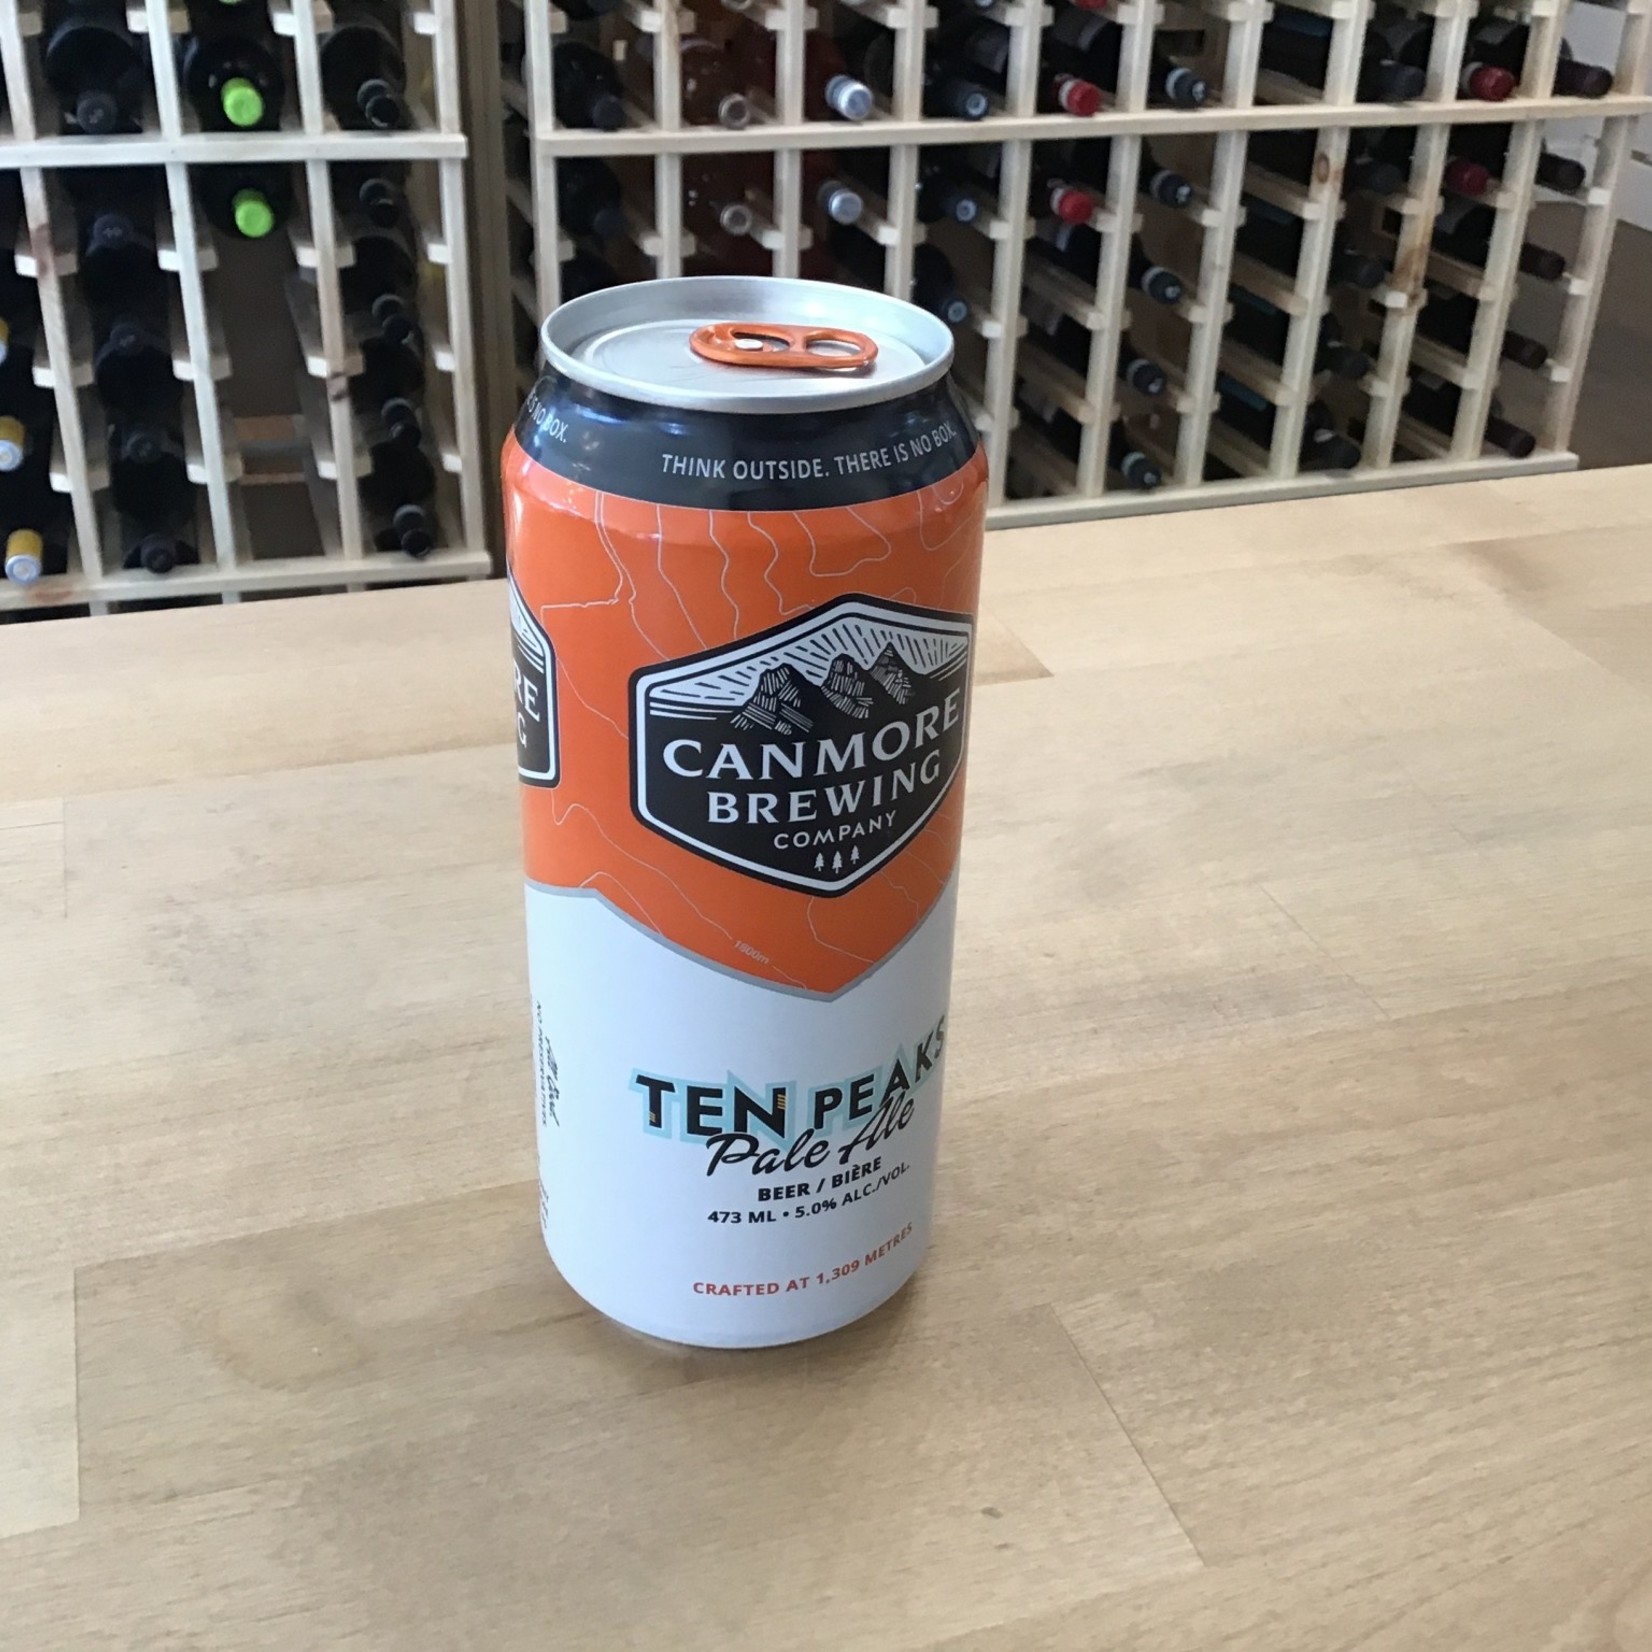 Canmore Brewing 'Ten Peaks' Pale Ale, Canmore Brewing 473ml 5.0%